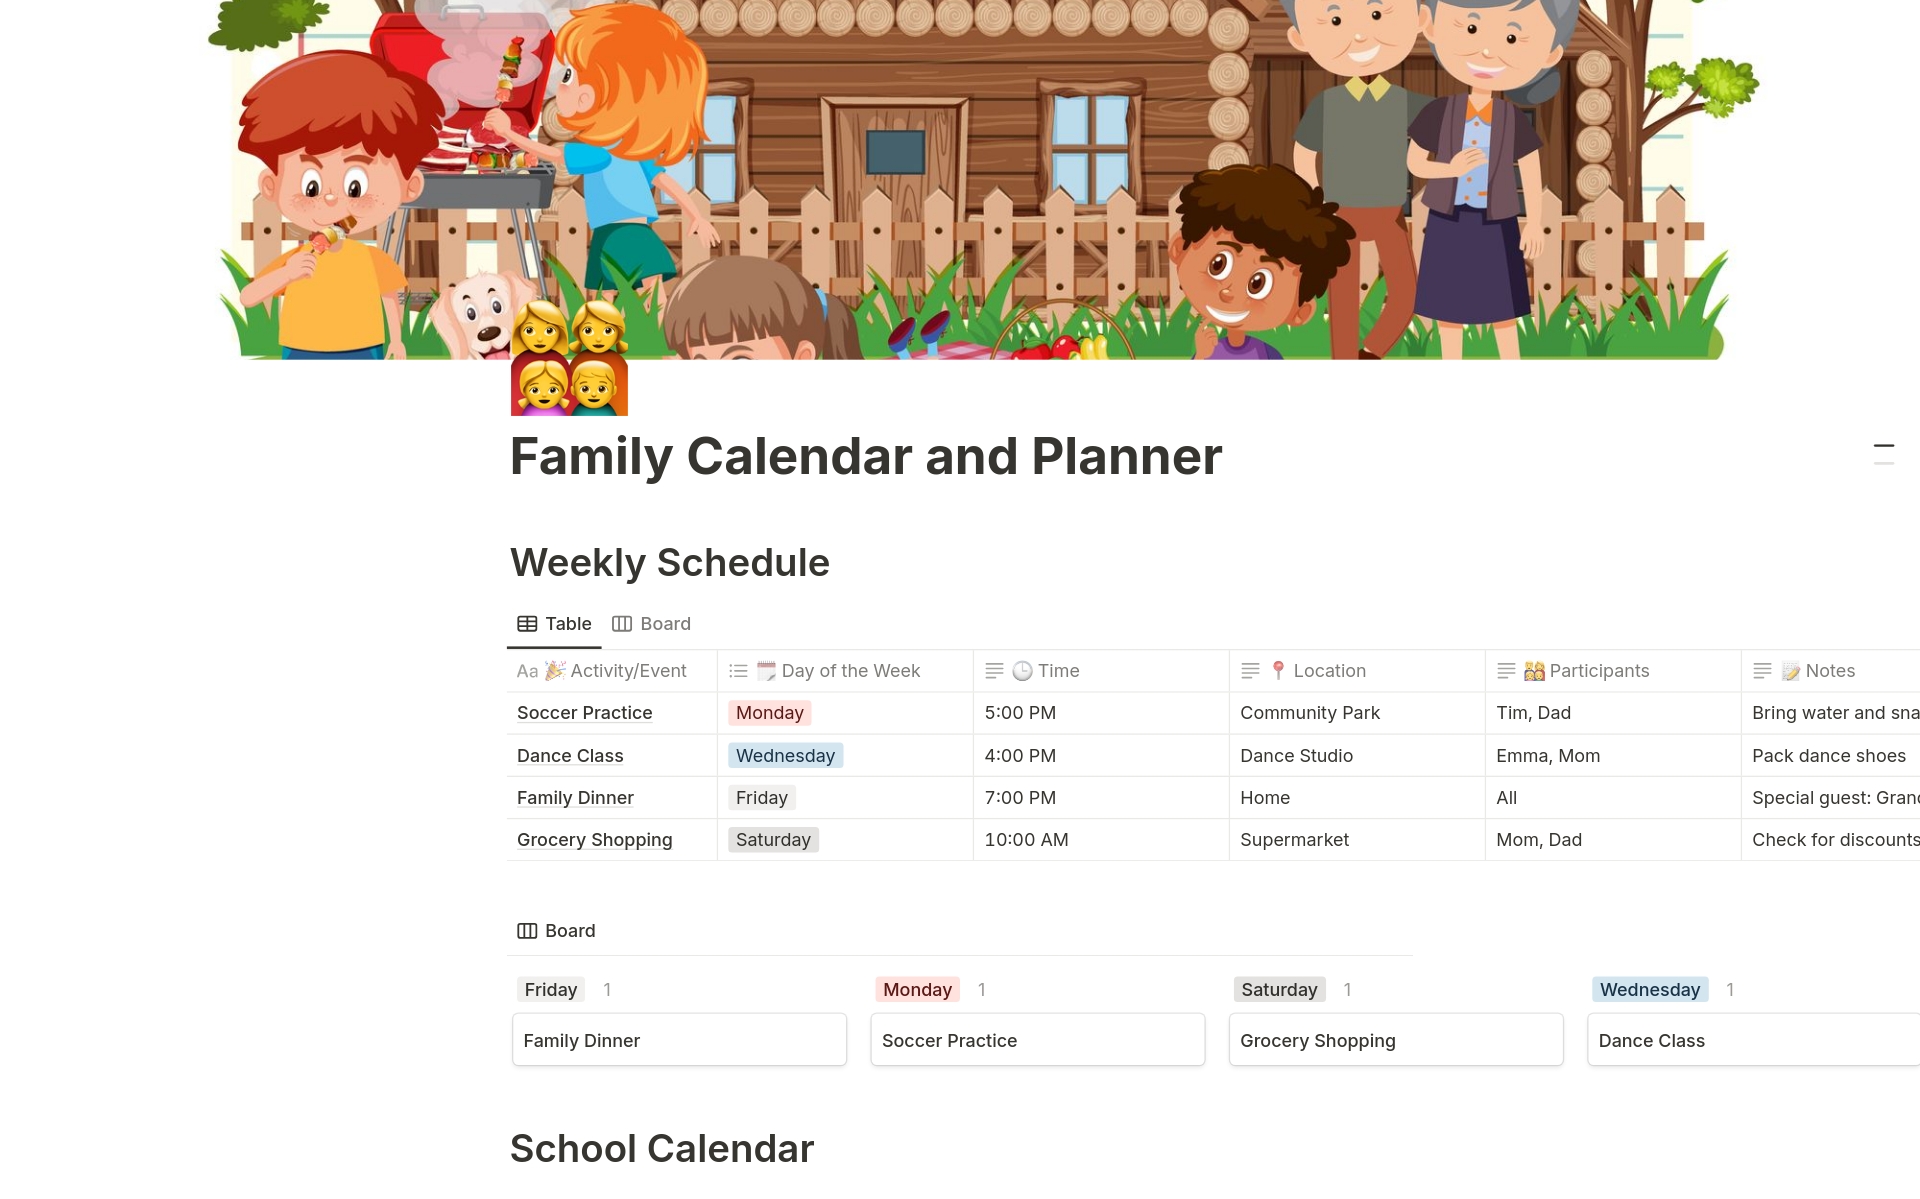 Organize your family’s activities and school events efficiently with our comprehensive Family Calendar and Planner Notion template.